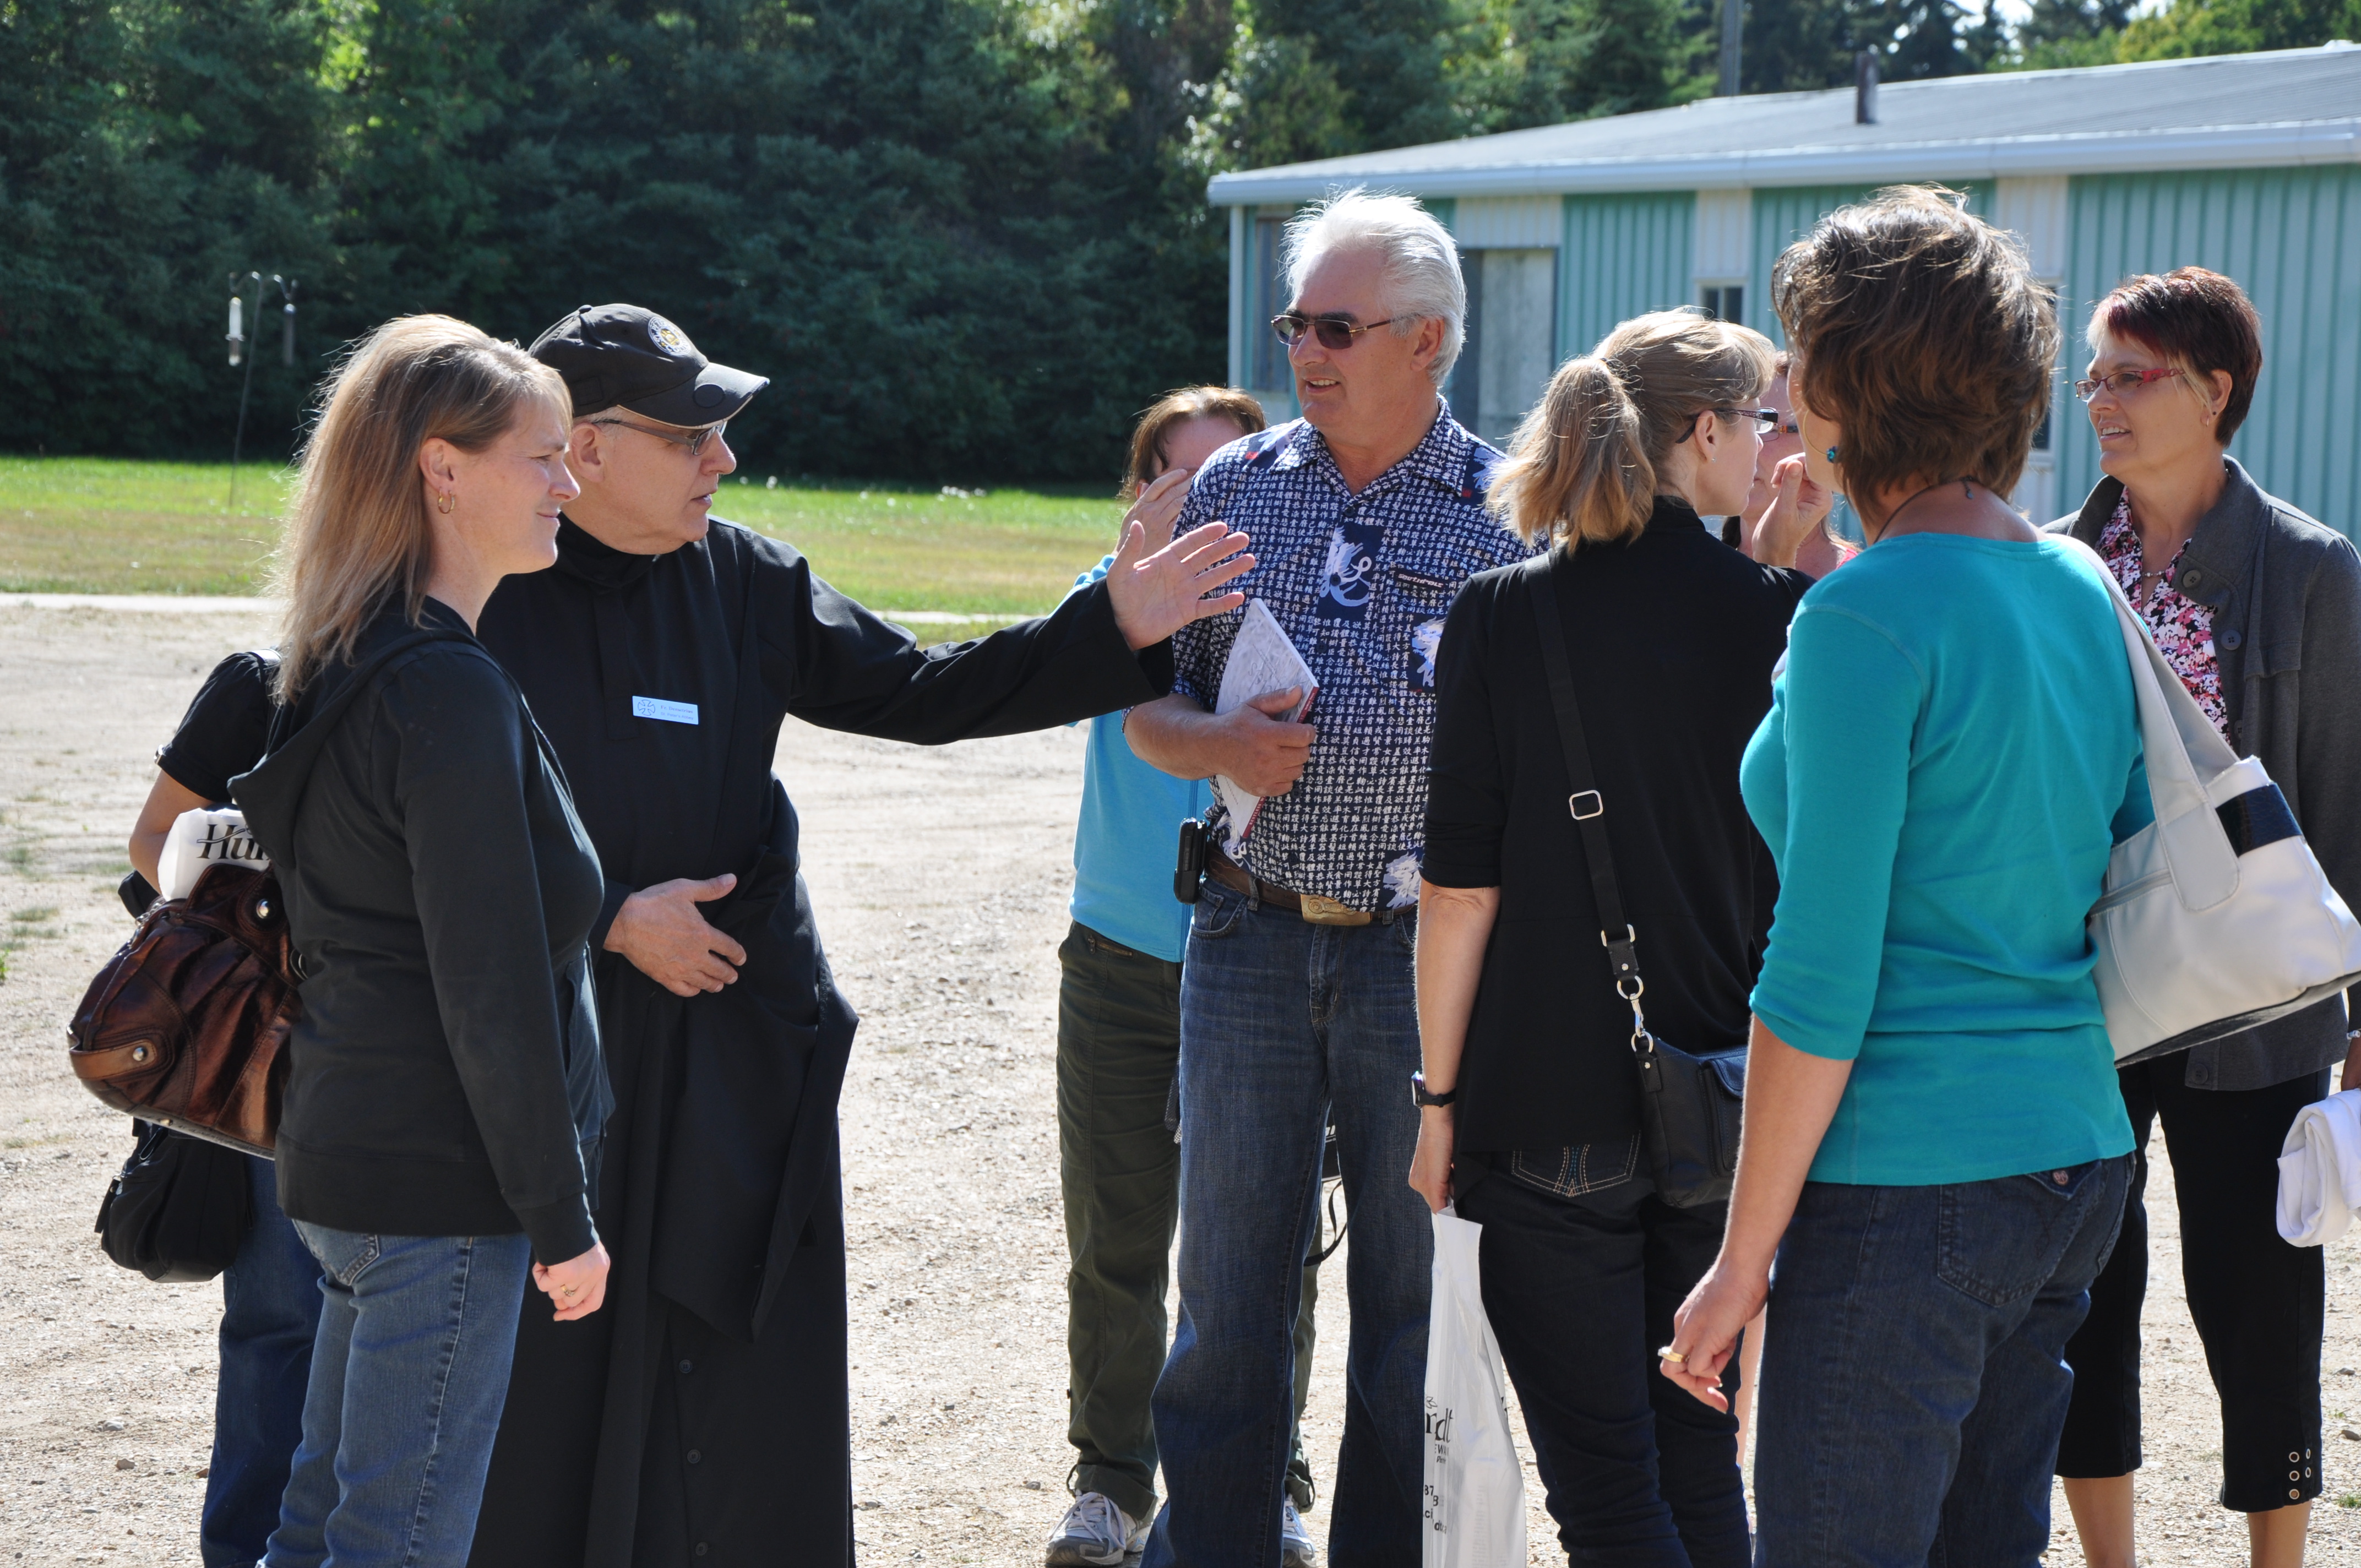 Fr. Demetrius Wasylyniuk, OSB leads a tour of St. Peter's Abbey and College.